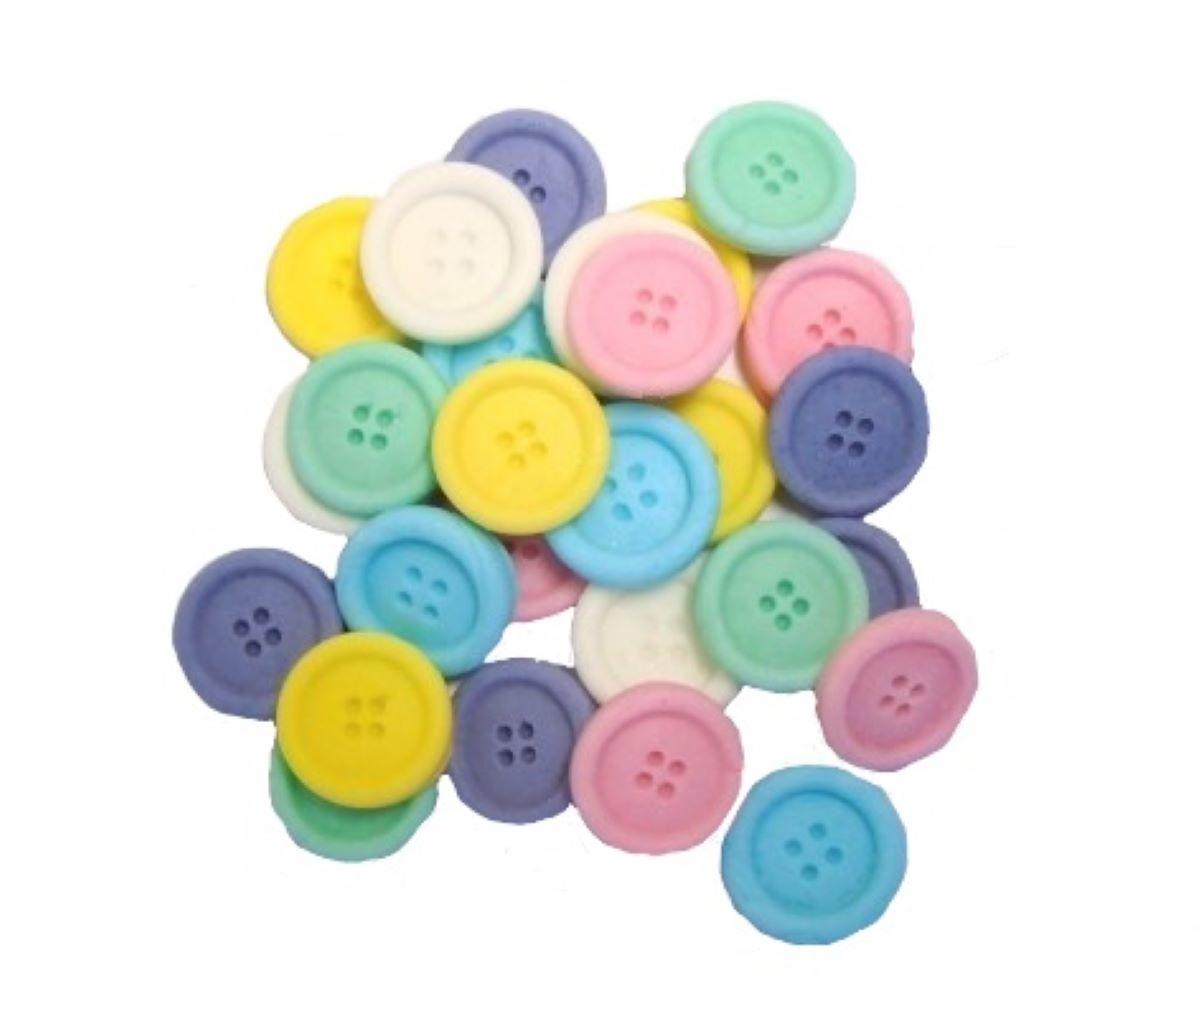 Pack 30 Mixed Coloured Buttons Vegan Cupcake Toppers Cake Decorations